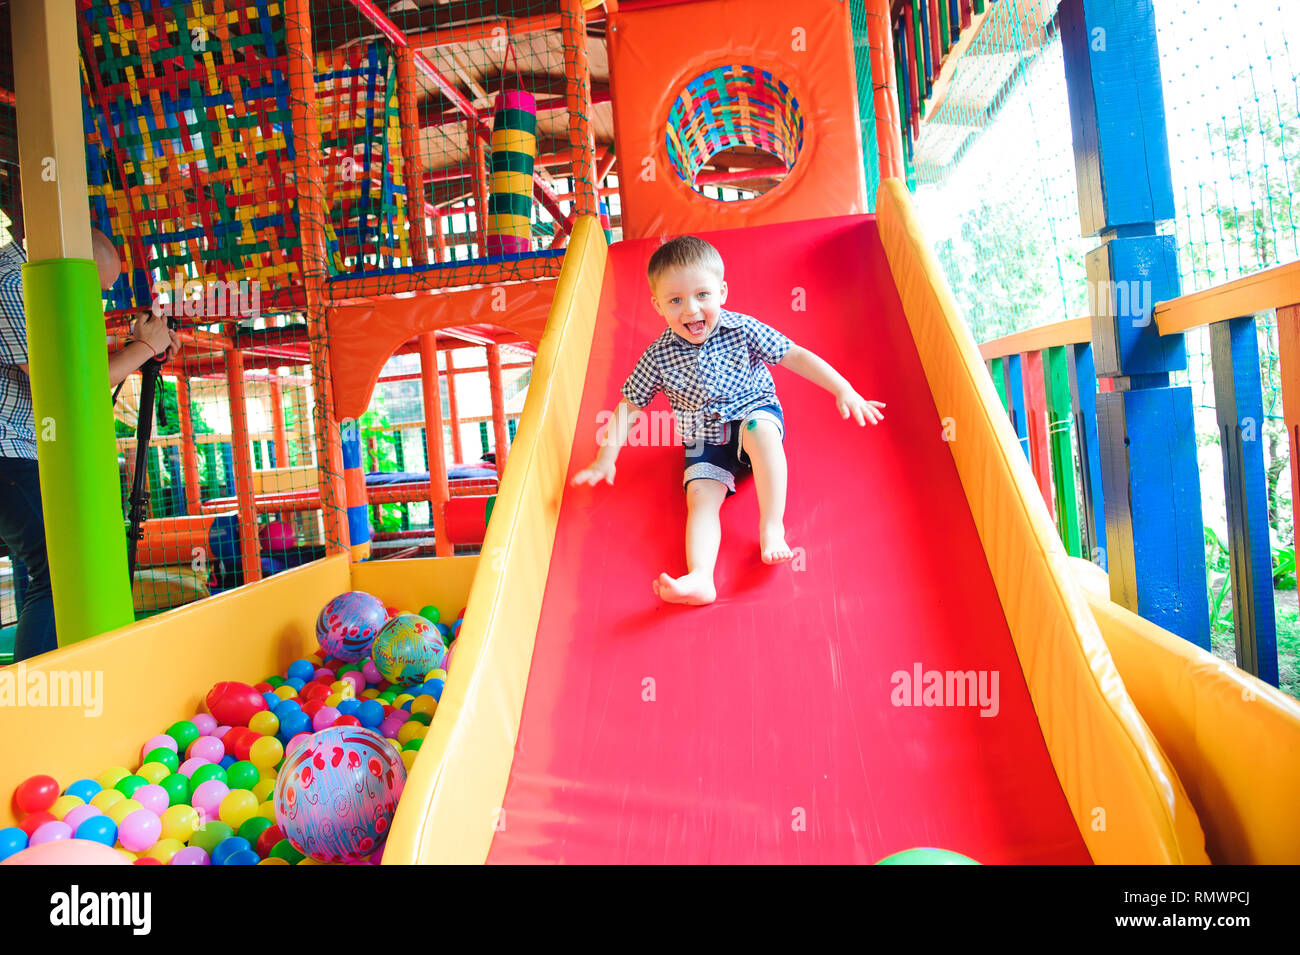 Indoor playground with colorful plastic balls for children Stock Photo